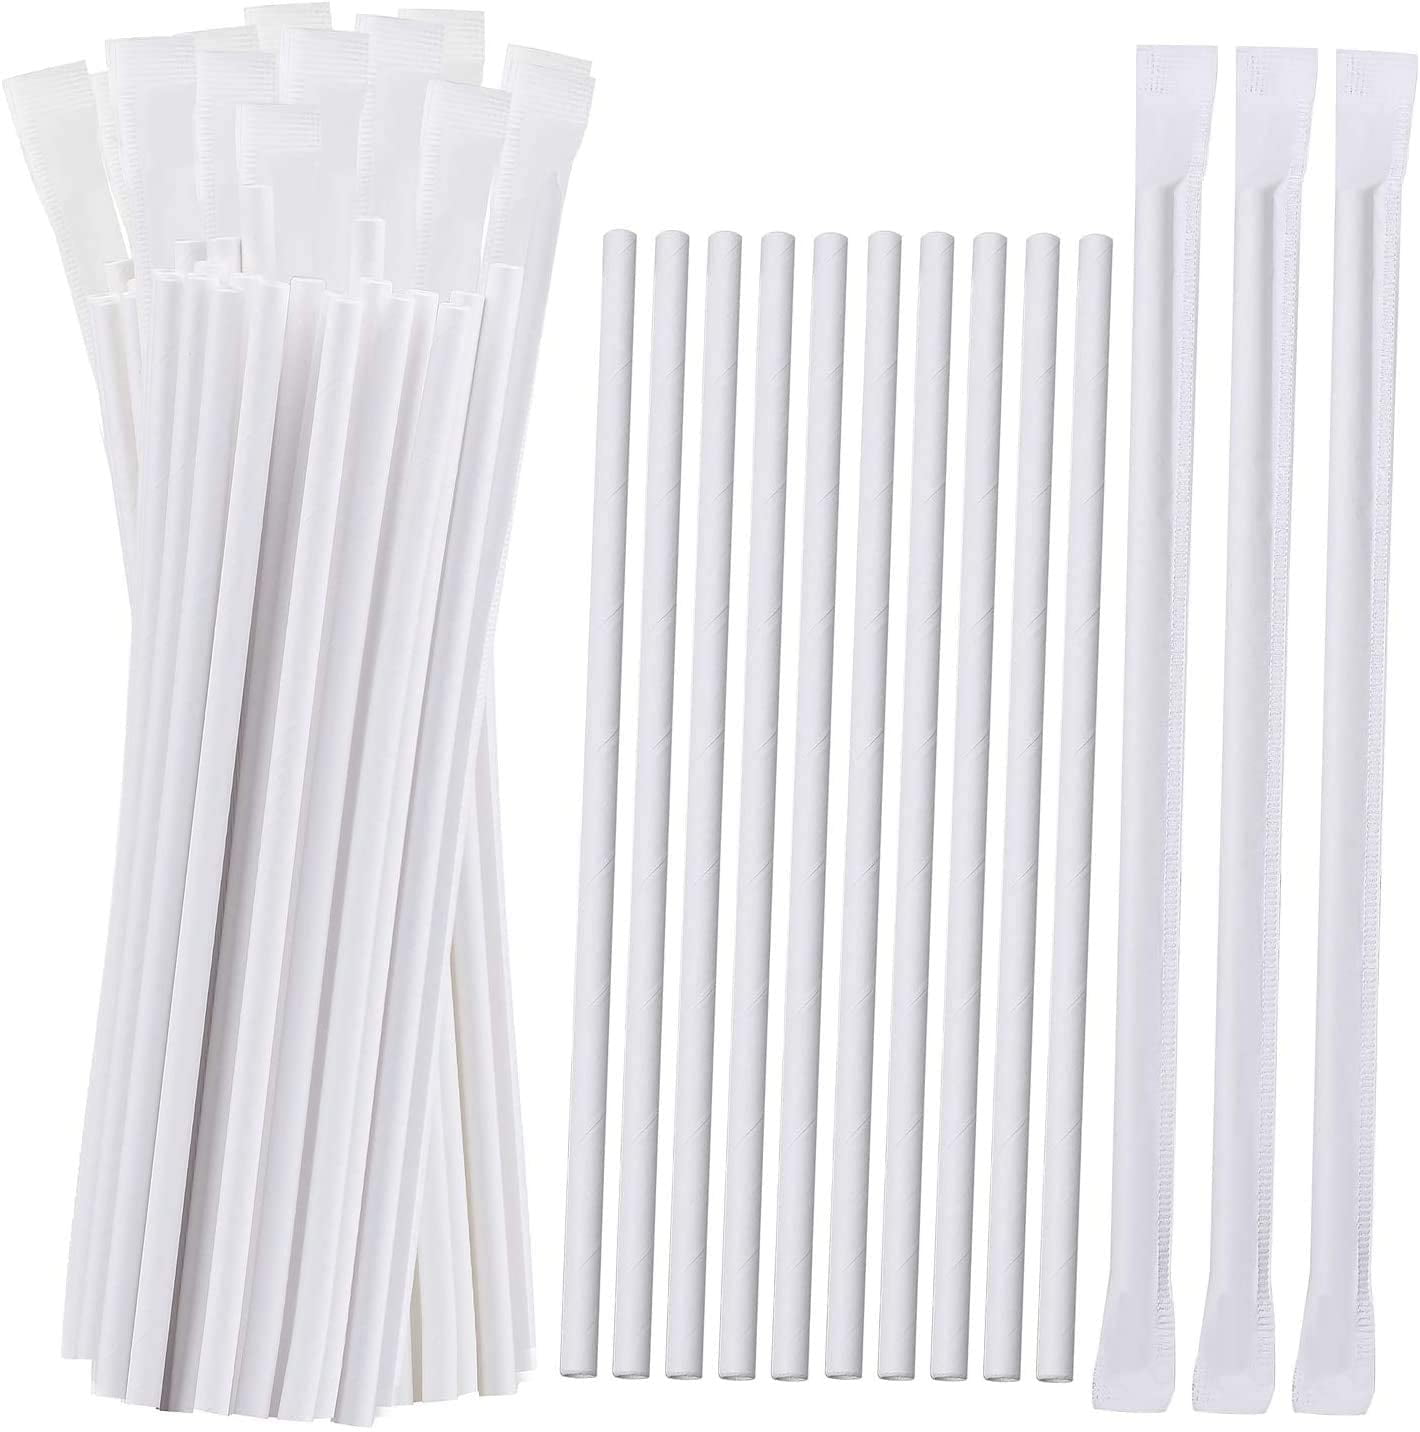 100 Pack White Paper Drinking Straws Wrapped Eco-Friendly 